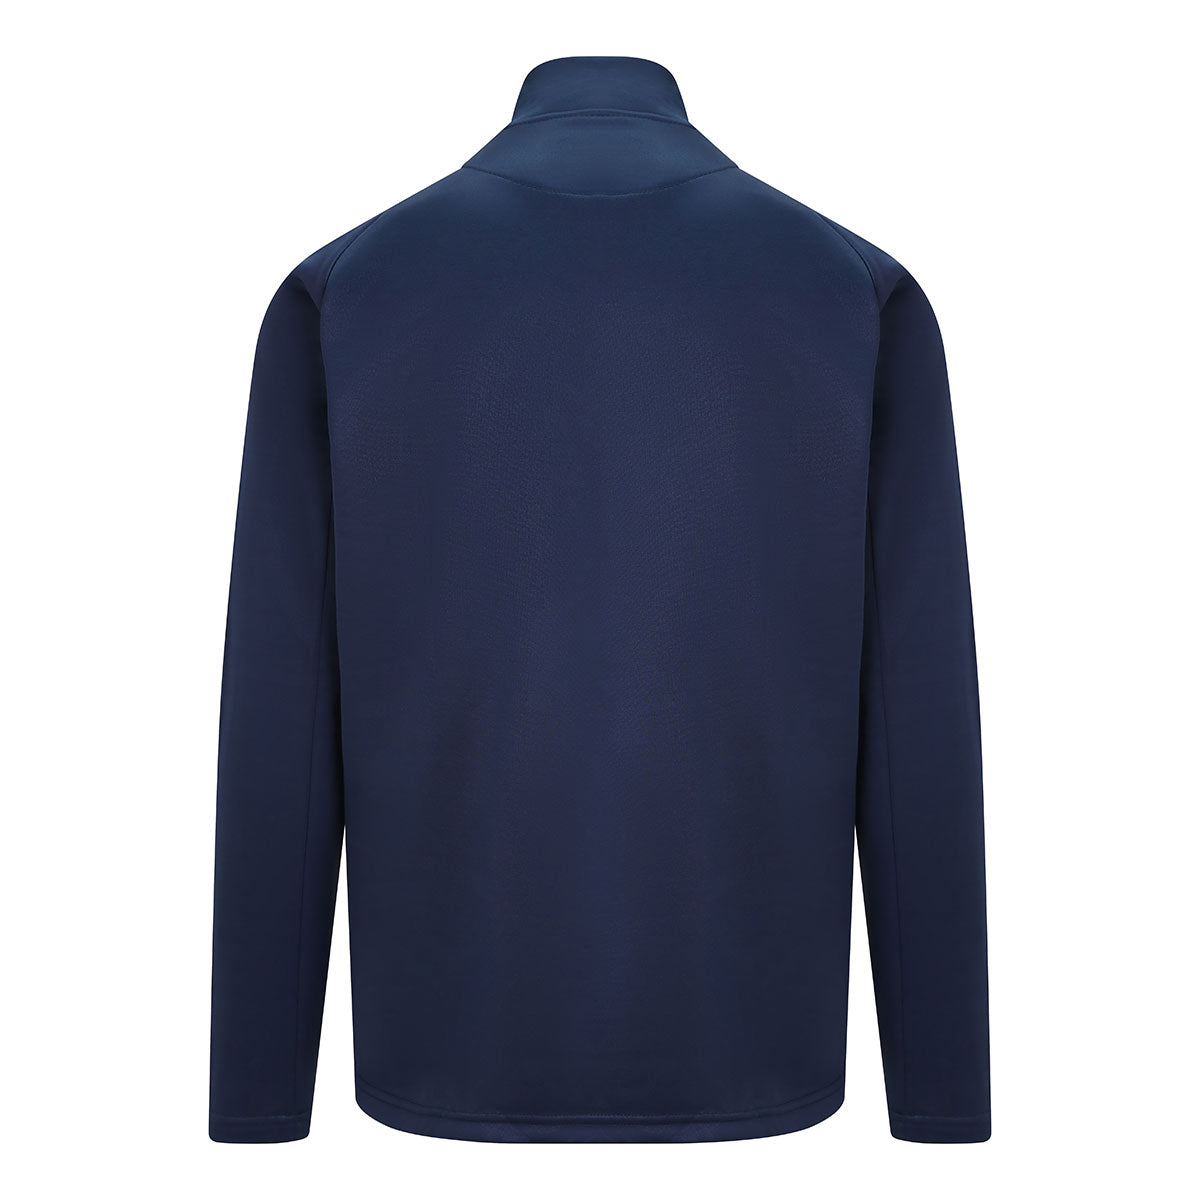 Mc Keever Gaelic Games Europe Core 22 Warm Top - Youth - Navy